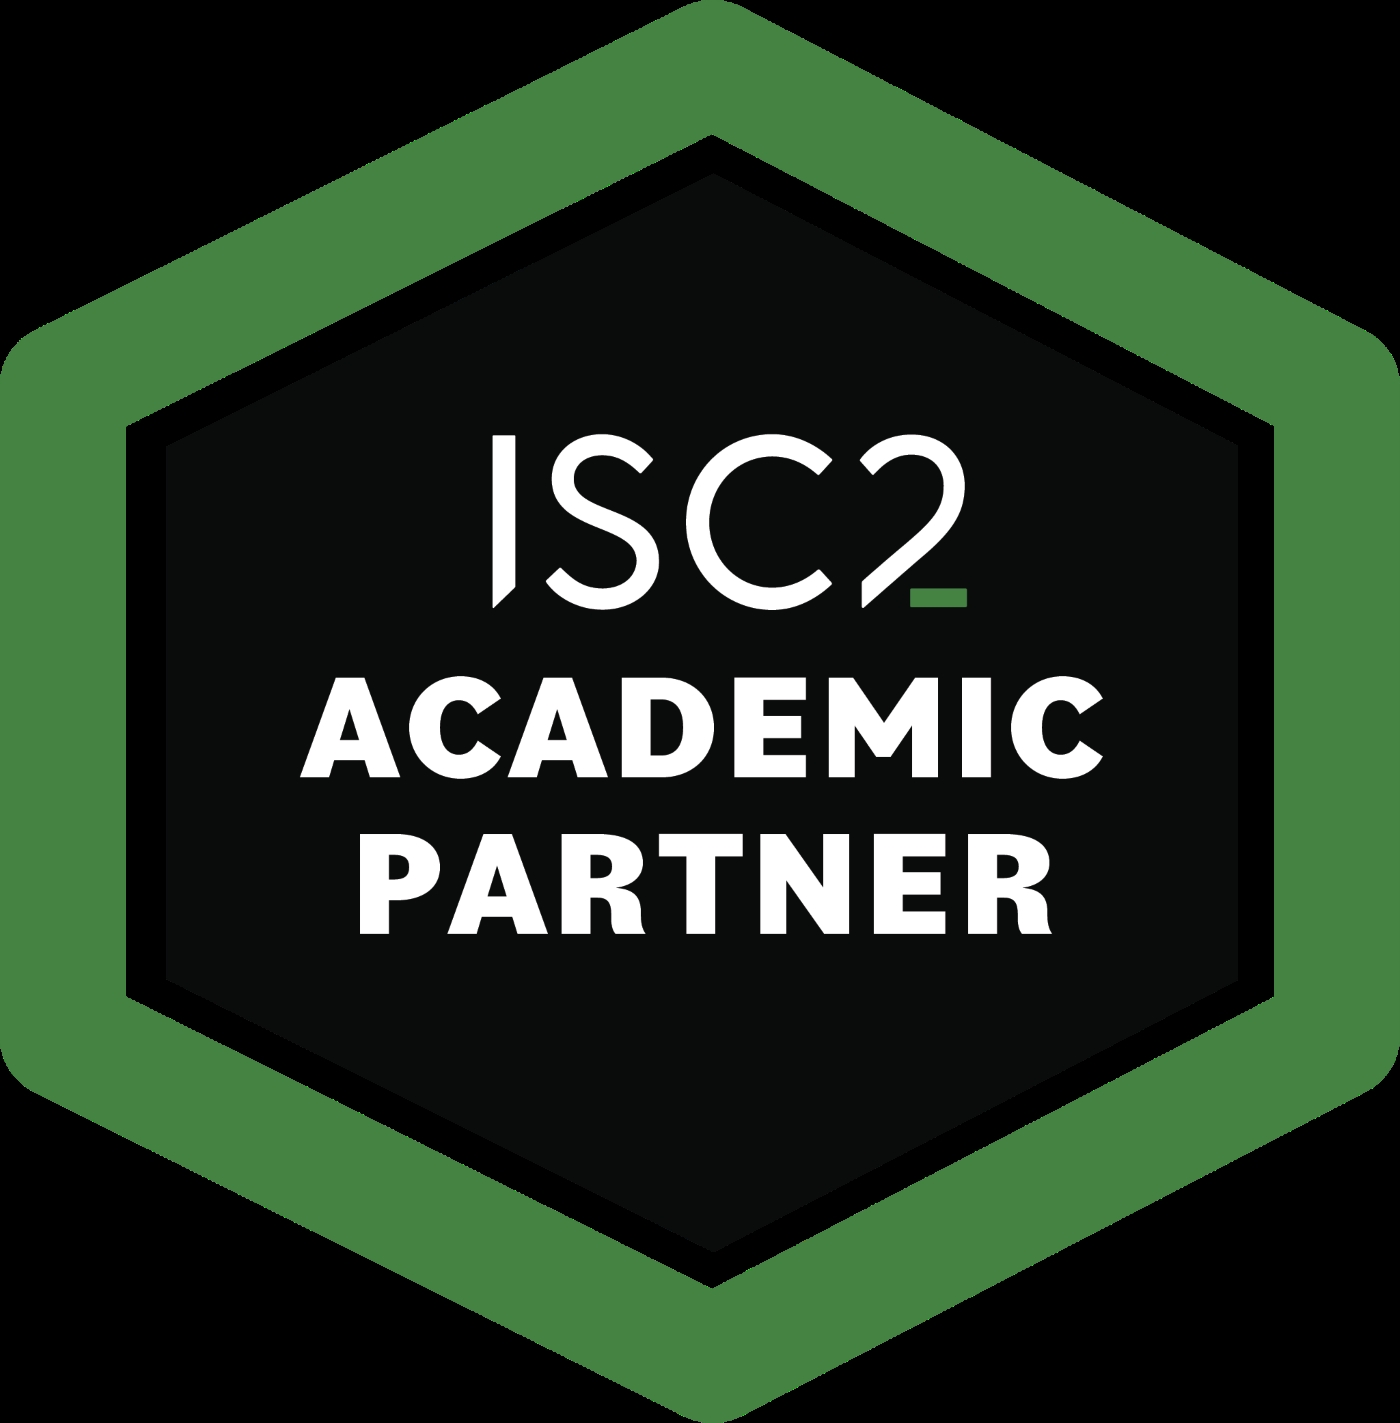 The world's leading non-profit membership association for cyber security professionals, ISC2.